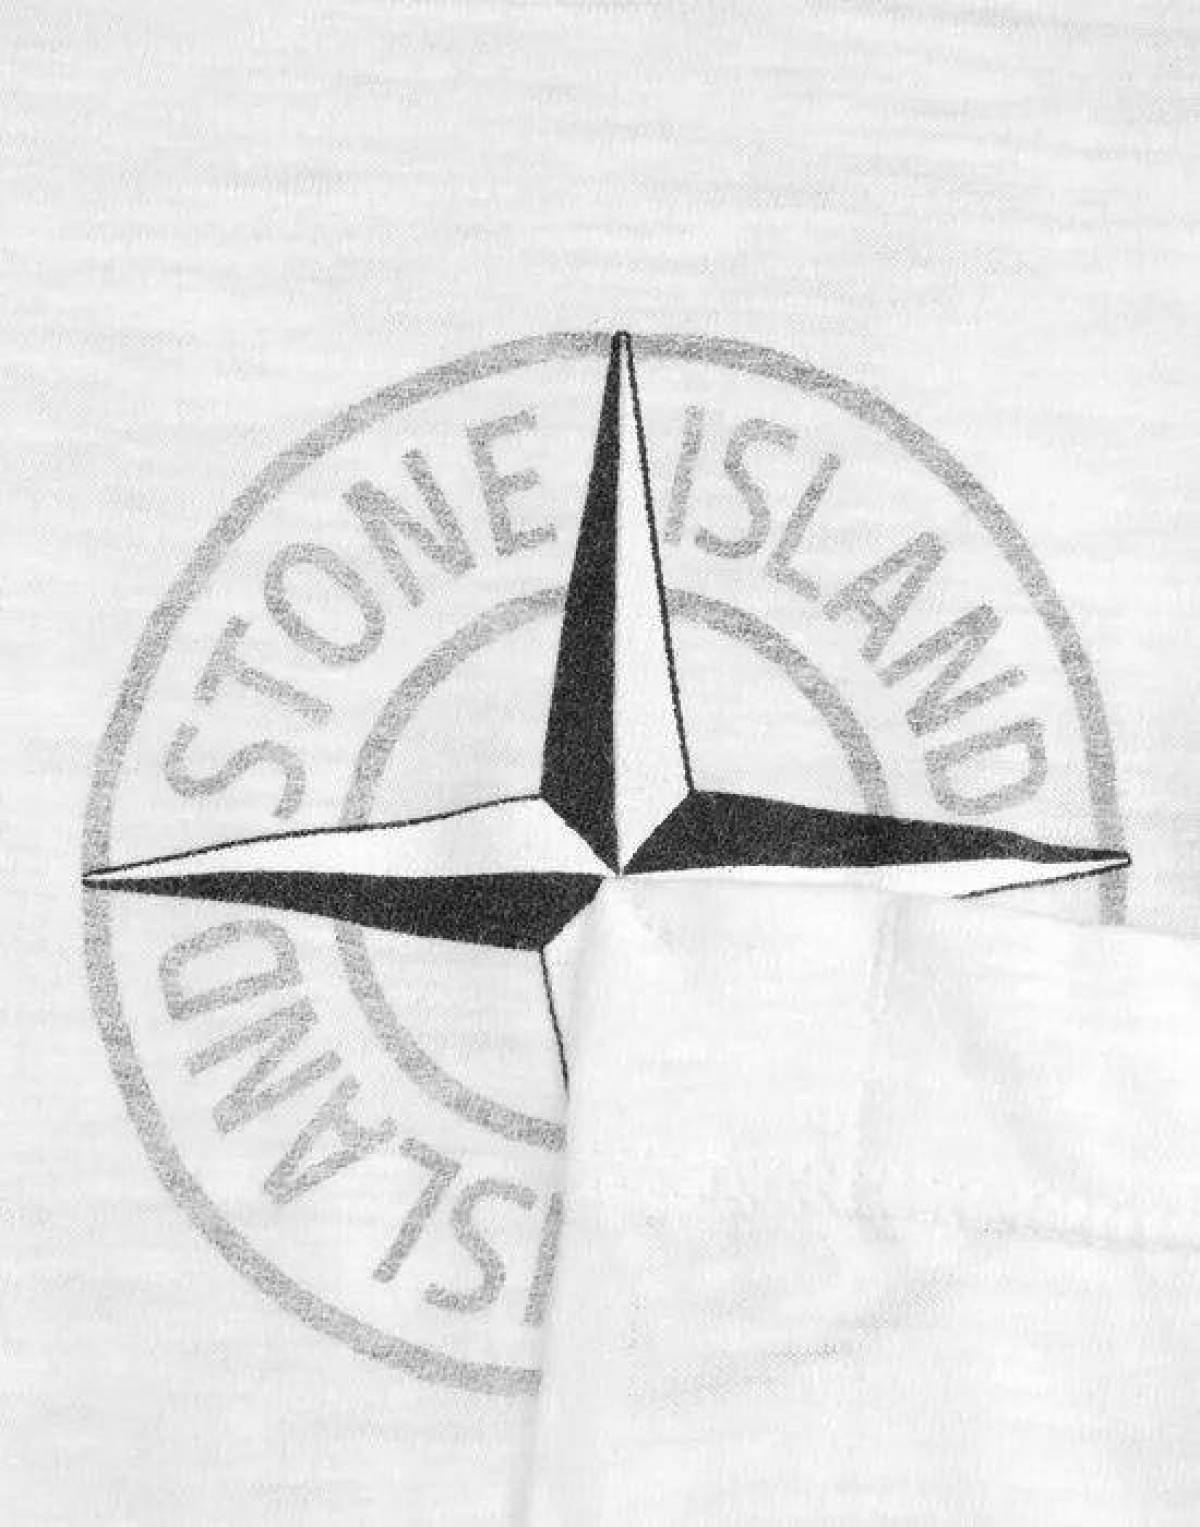 Shining stone island coloring page